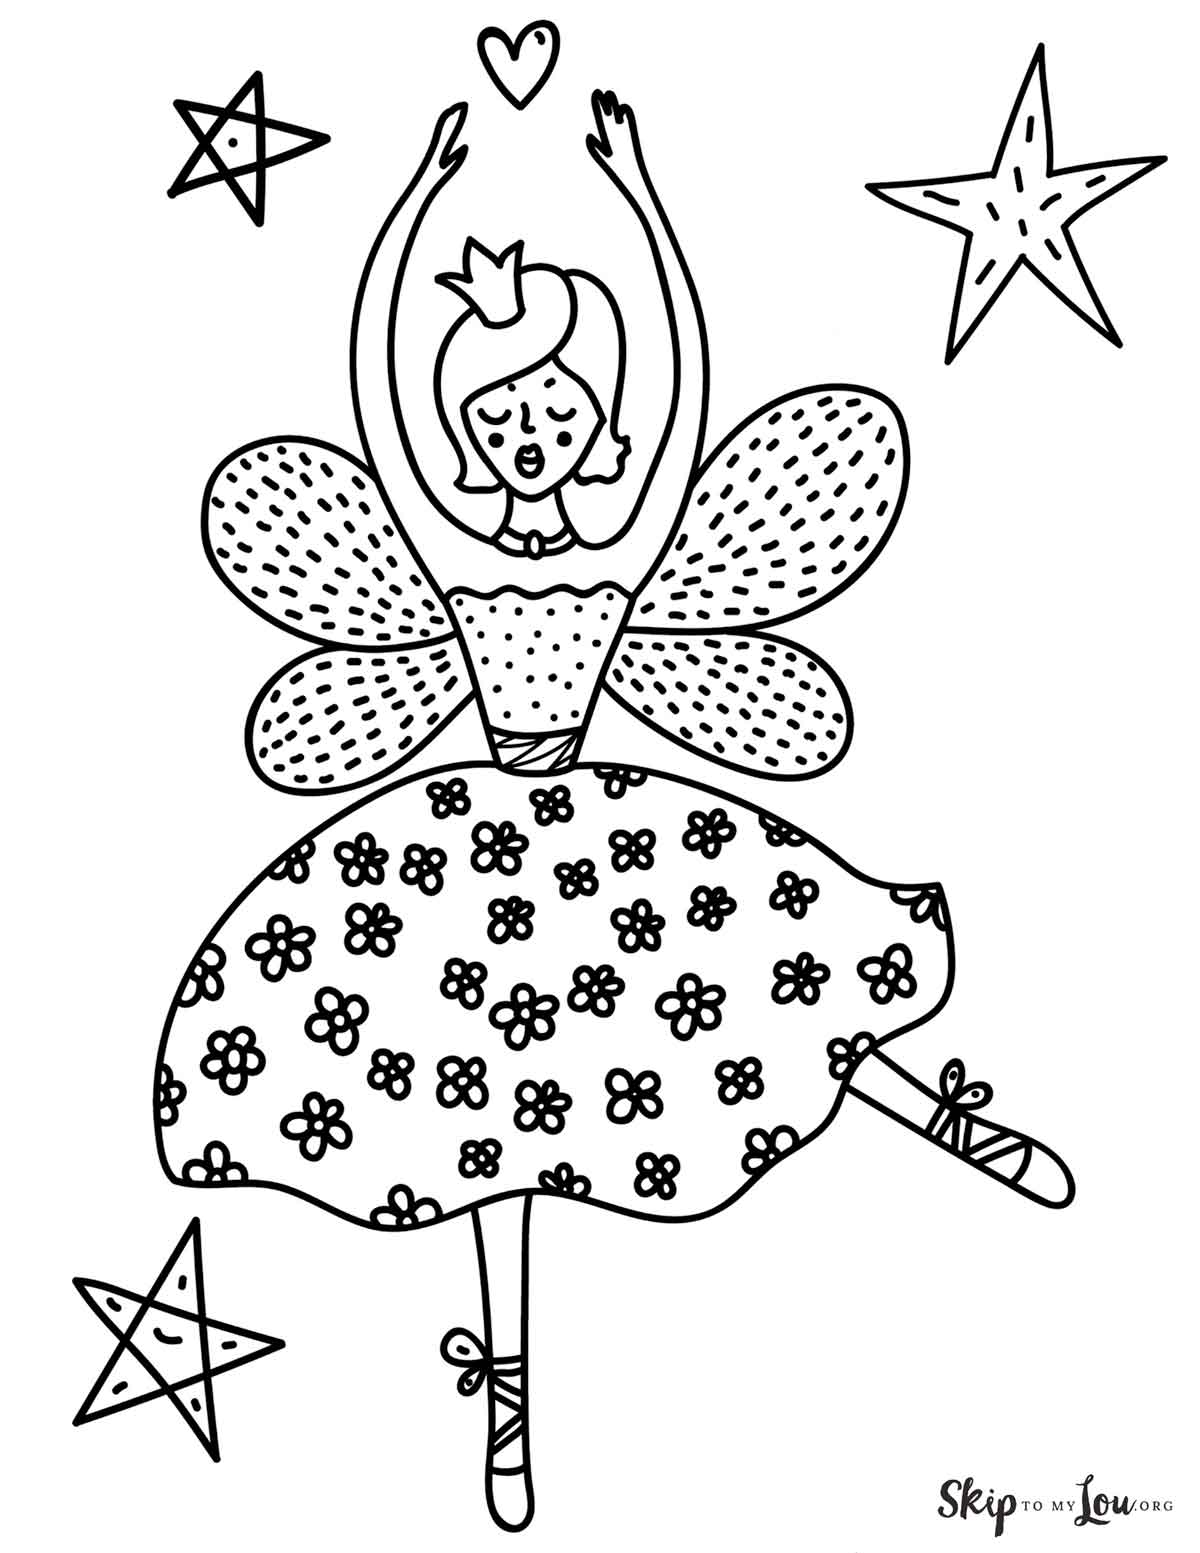 Nutcracker coloring pages skip to my lou